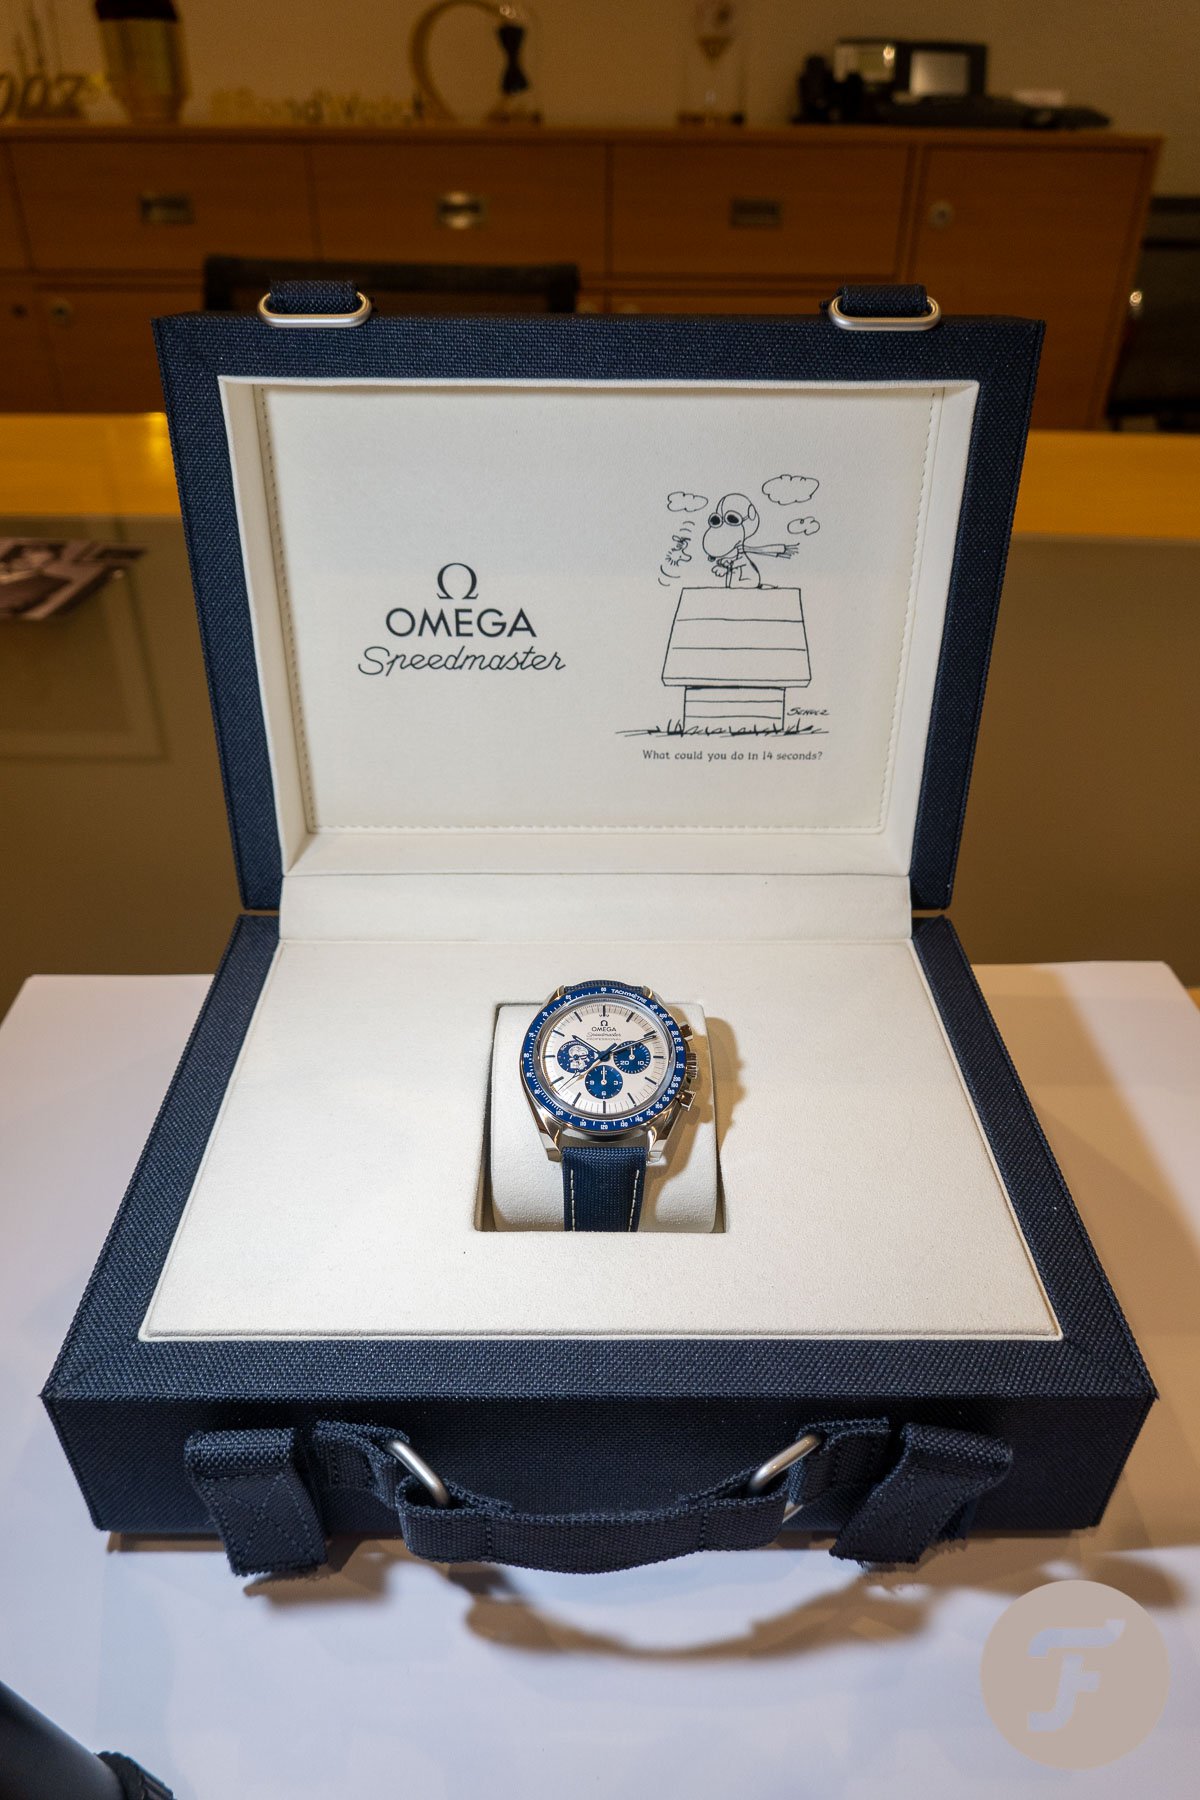 Omega Celebrates The Silver Snoopy Award's 50th Anniversary With New Speedmaster  Moonwatch